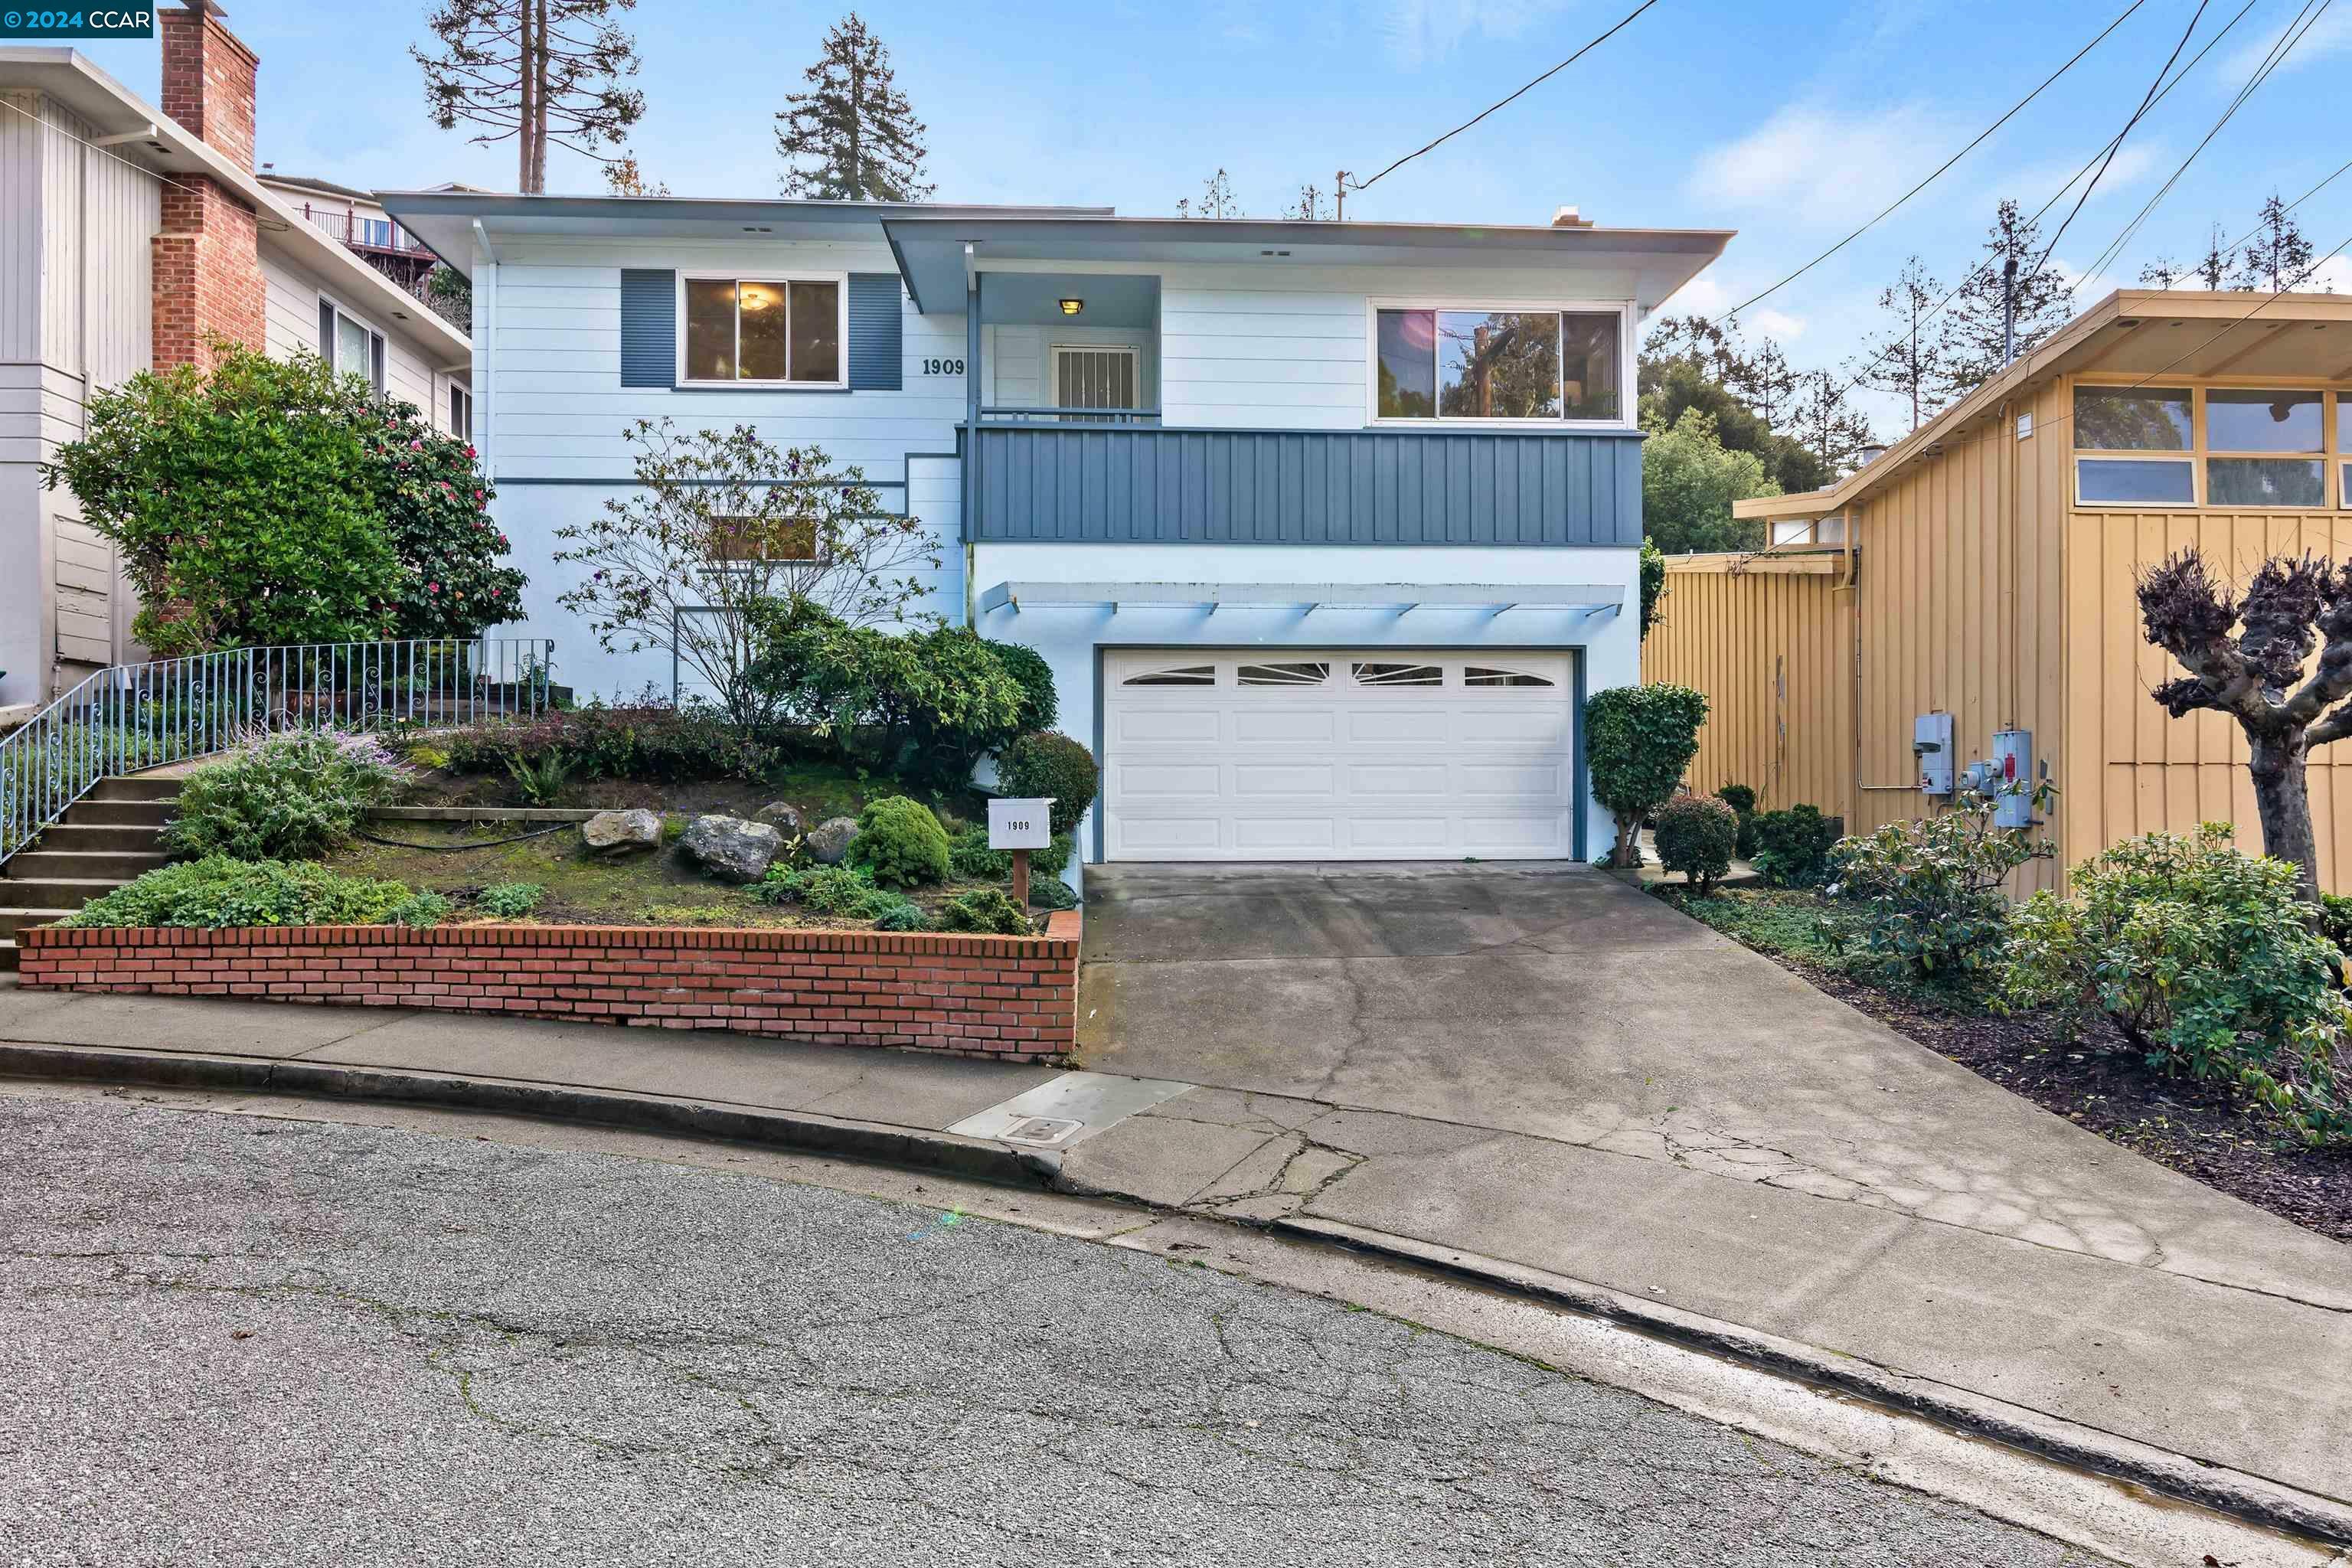 Property Photo:  1909 Cortereal Ave  CA 94611 